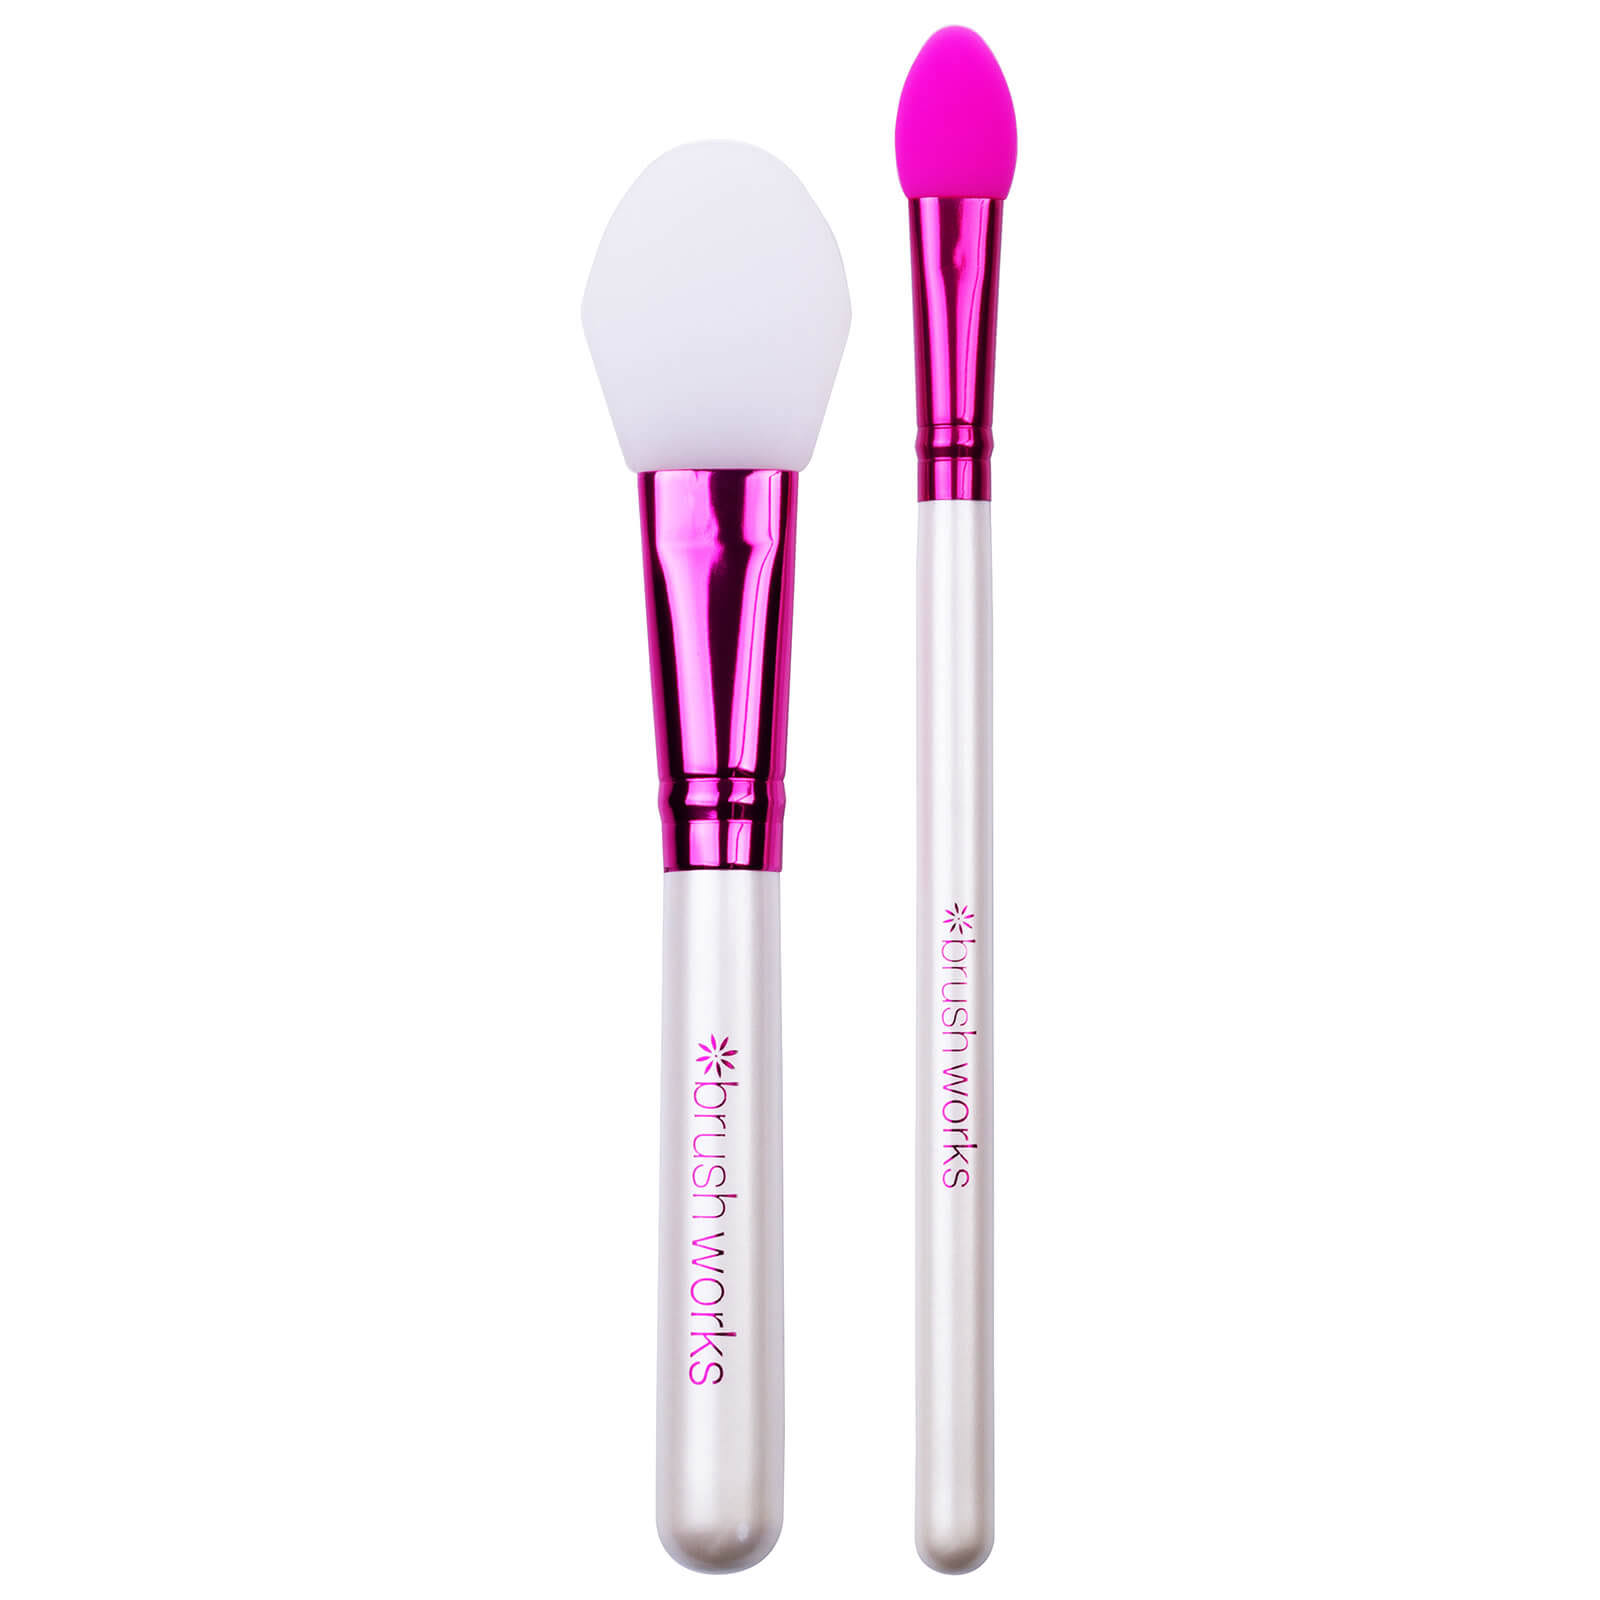 Brushworks Silicone Face Mask Applicators - Twin Pack